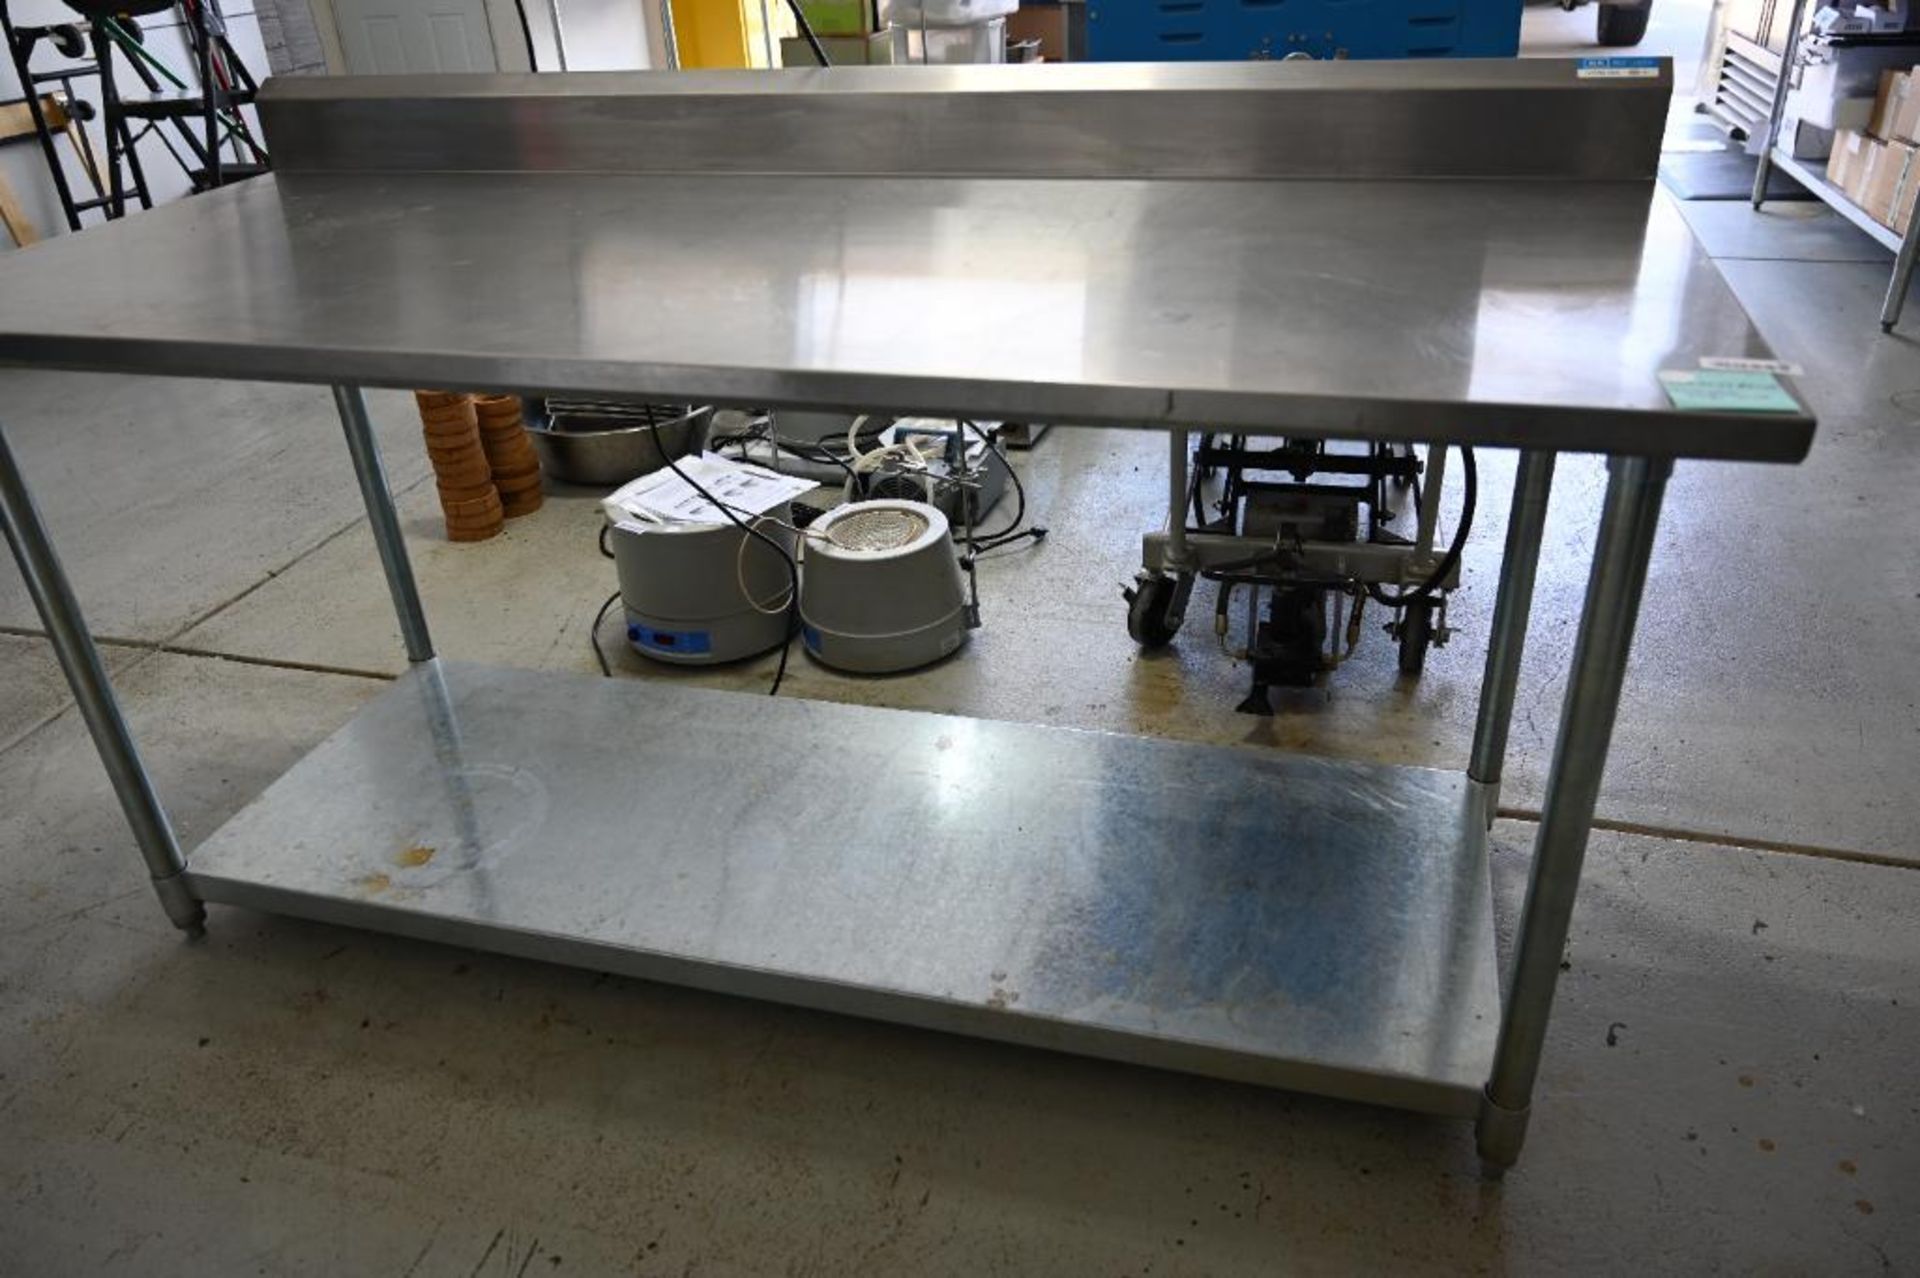 72" x 30.25"x 34.25" Stainless Steel Work Table with Back splash - Image 4 of 6